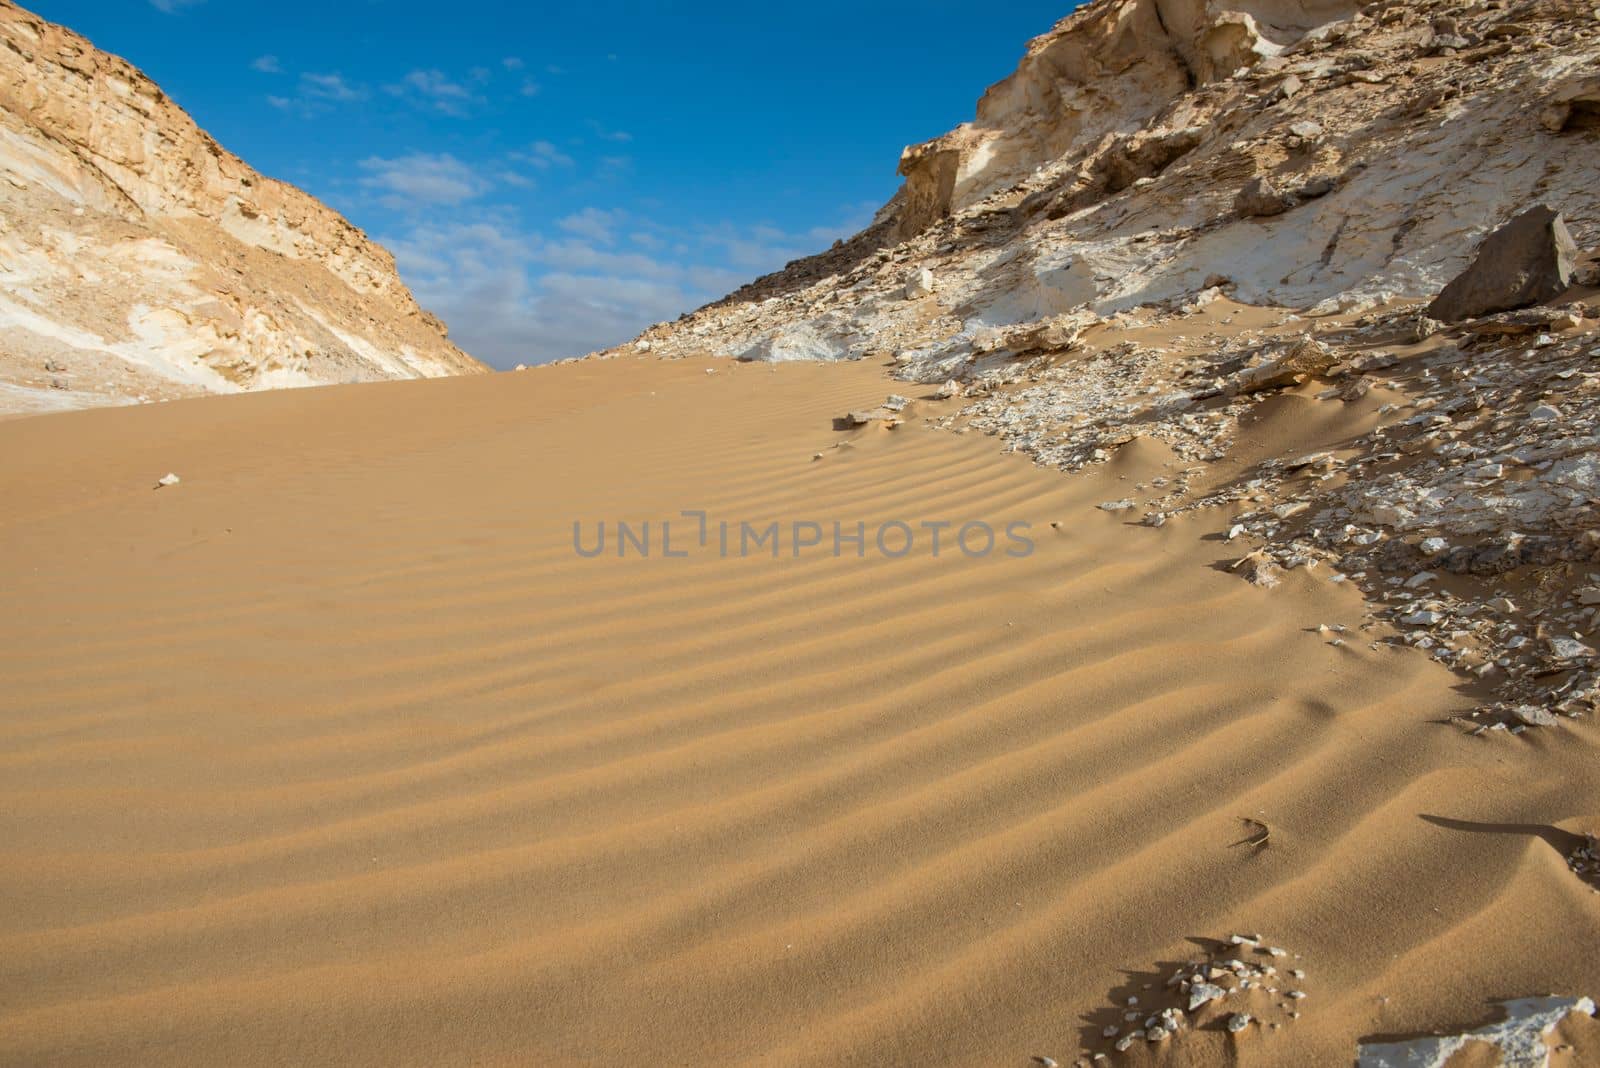 Landscape scenic view of desolate barren western desert in Egypt with sand dunes and rocky mountain